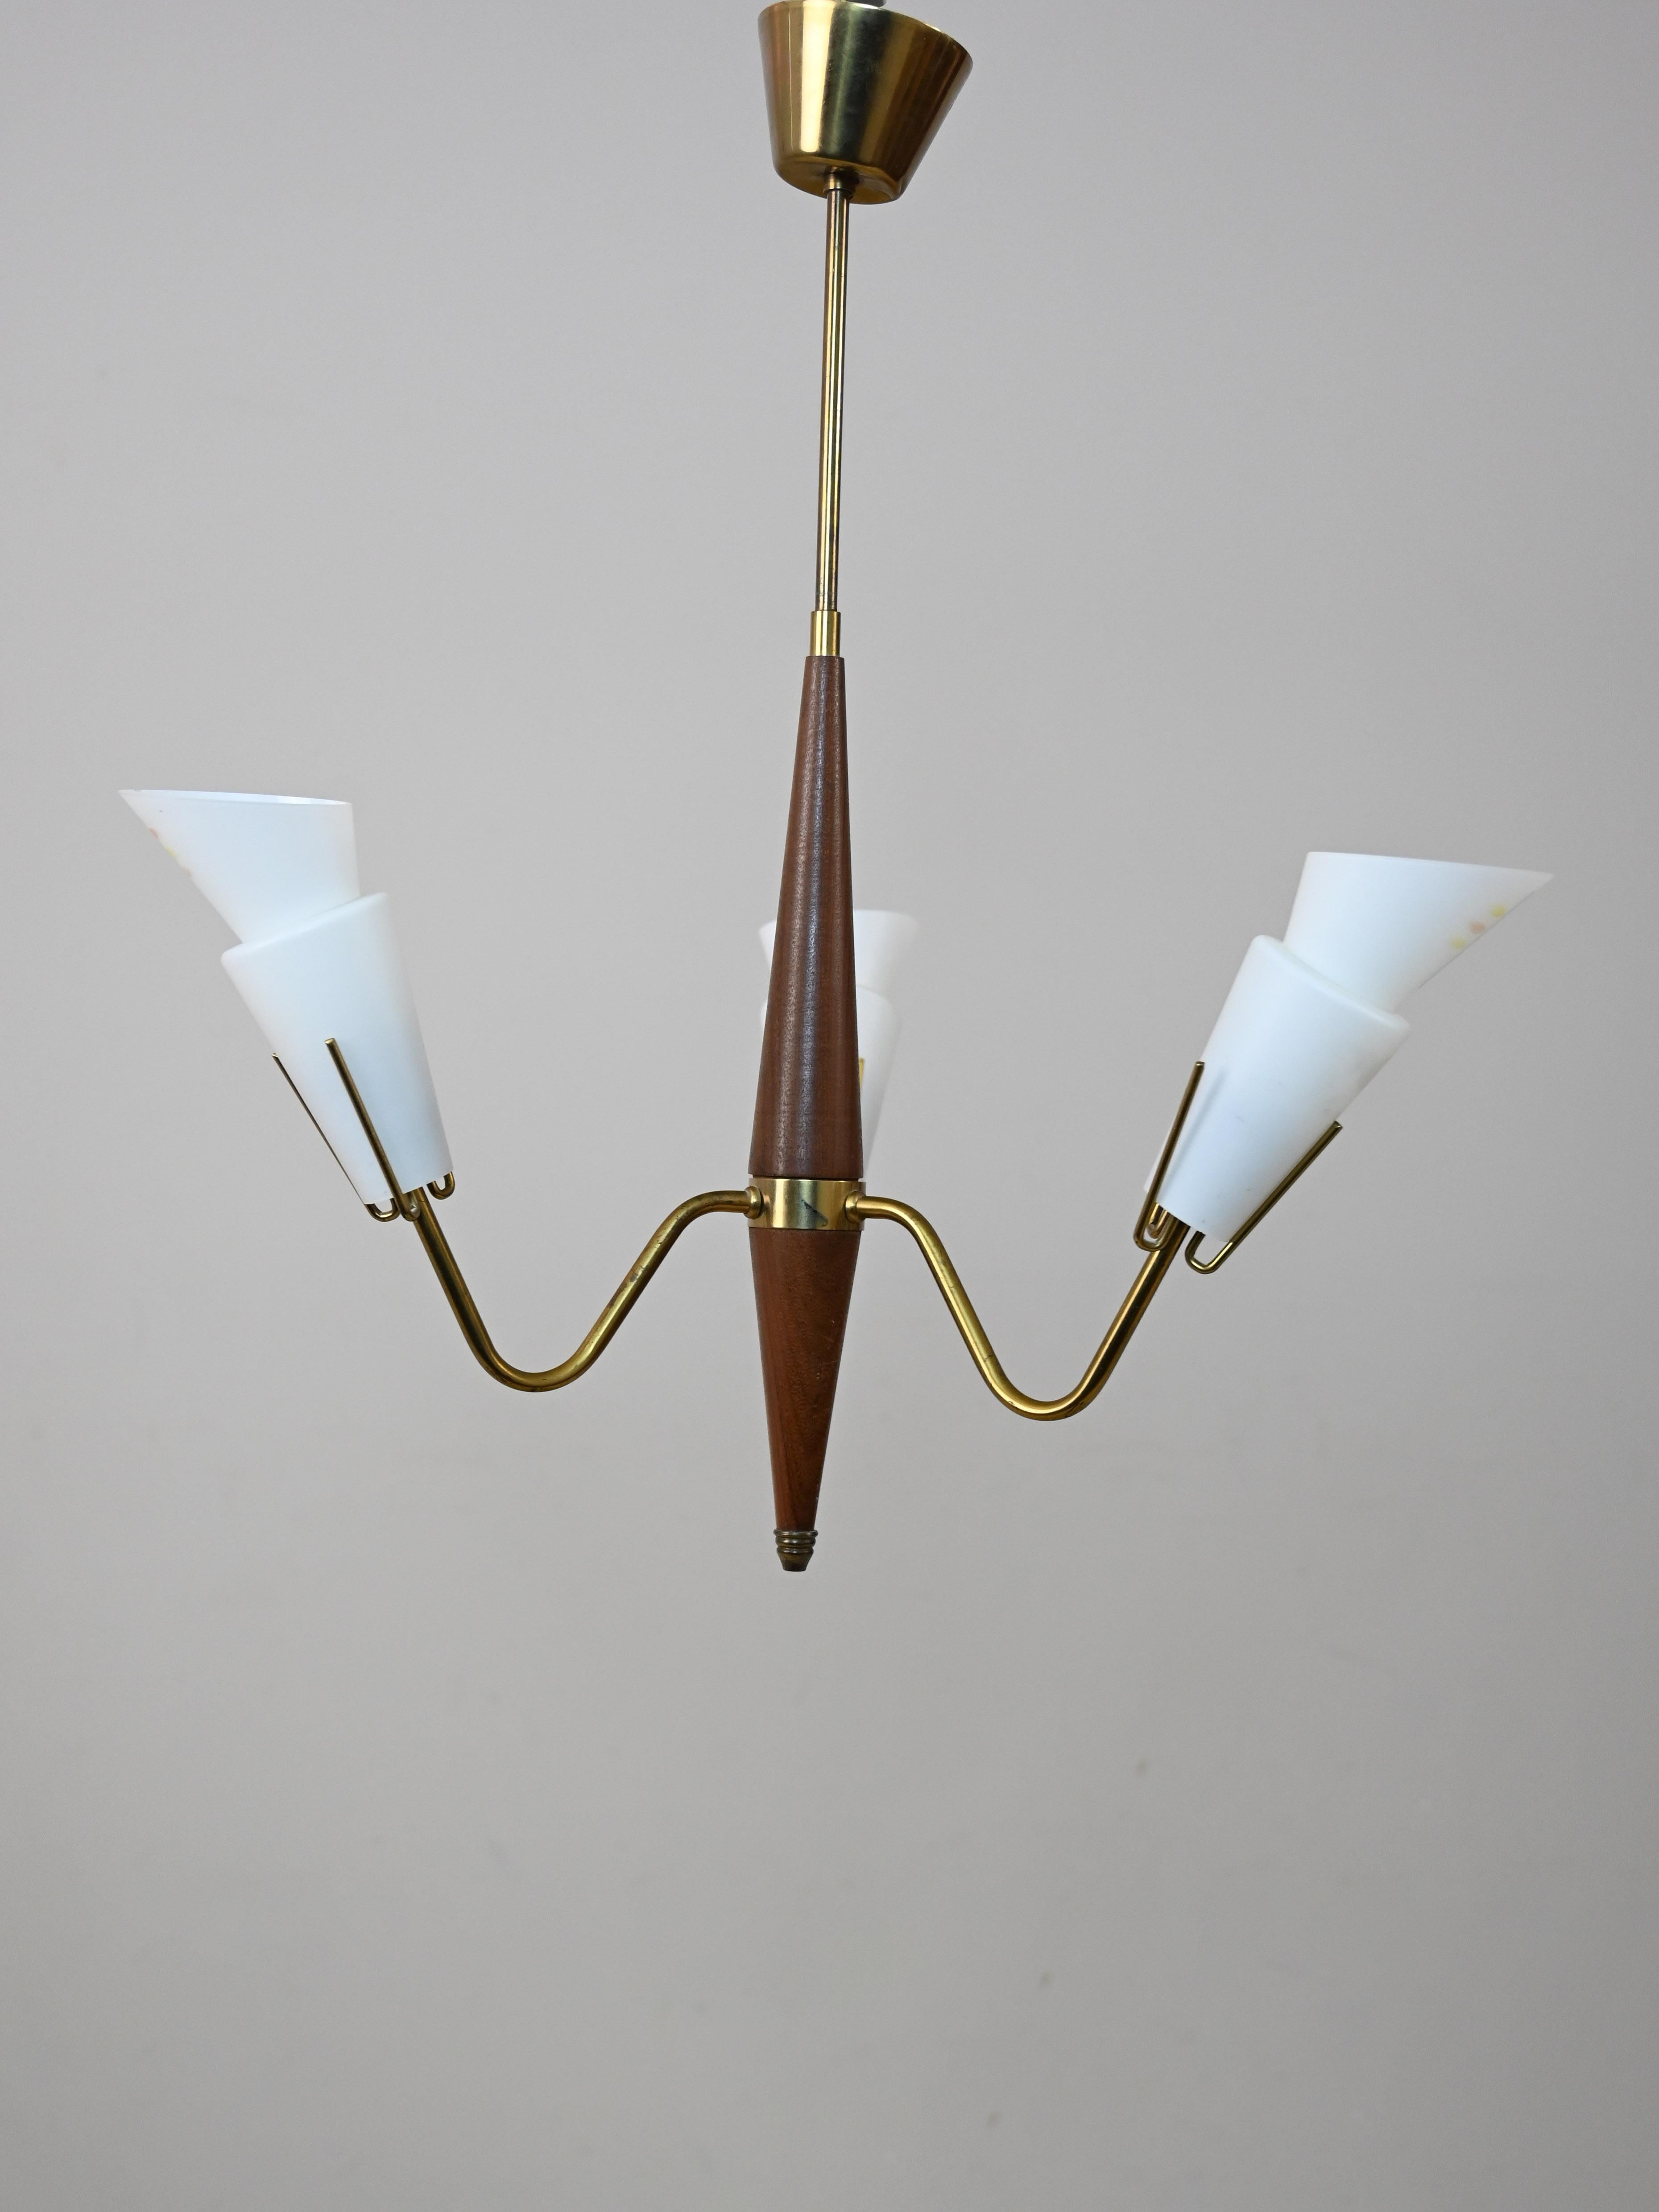 Lamp with teak frame and 3 lights.

This Scandinavian modernist furnishing accessory traces mid-century style and taste.
The original and elegant form consists of a teak frame with three brass arms to which the 3 lights with decorated opaline glass